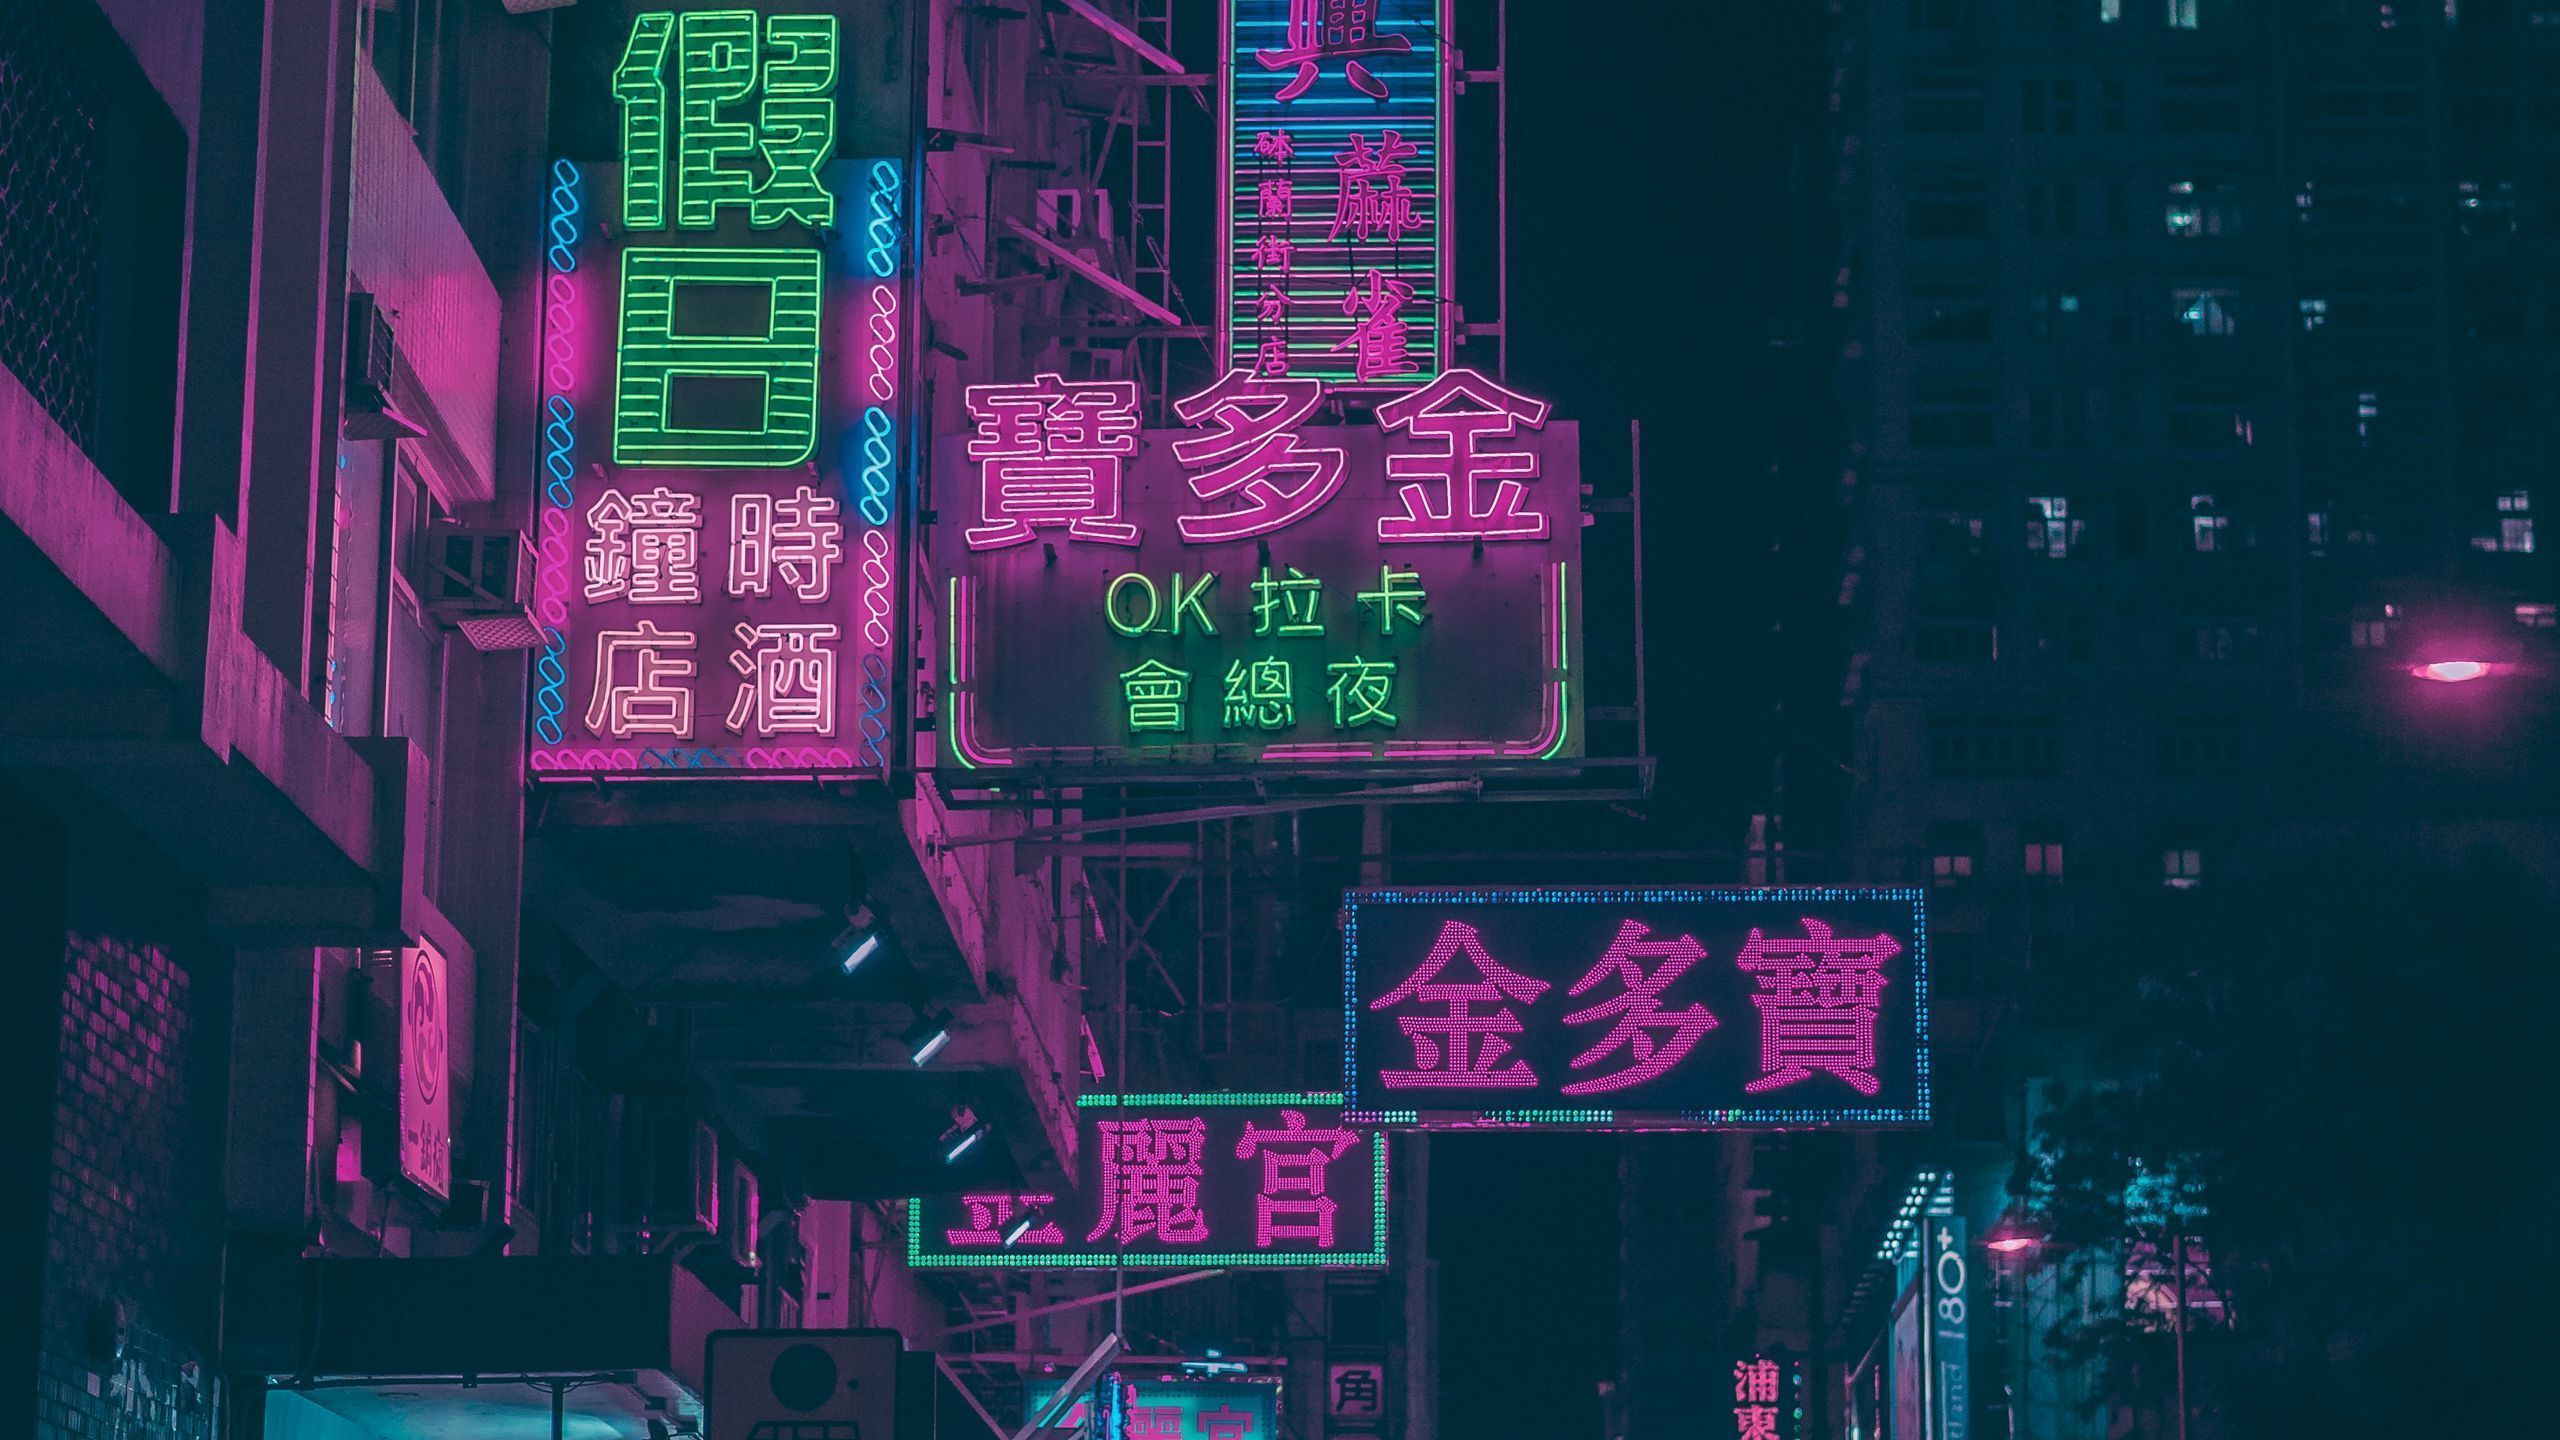 A street at night with neon signs in pink and green. - 2560x1440